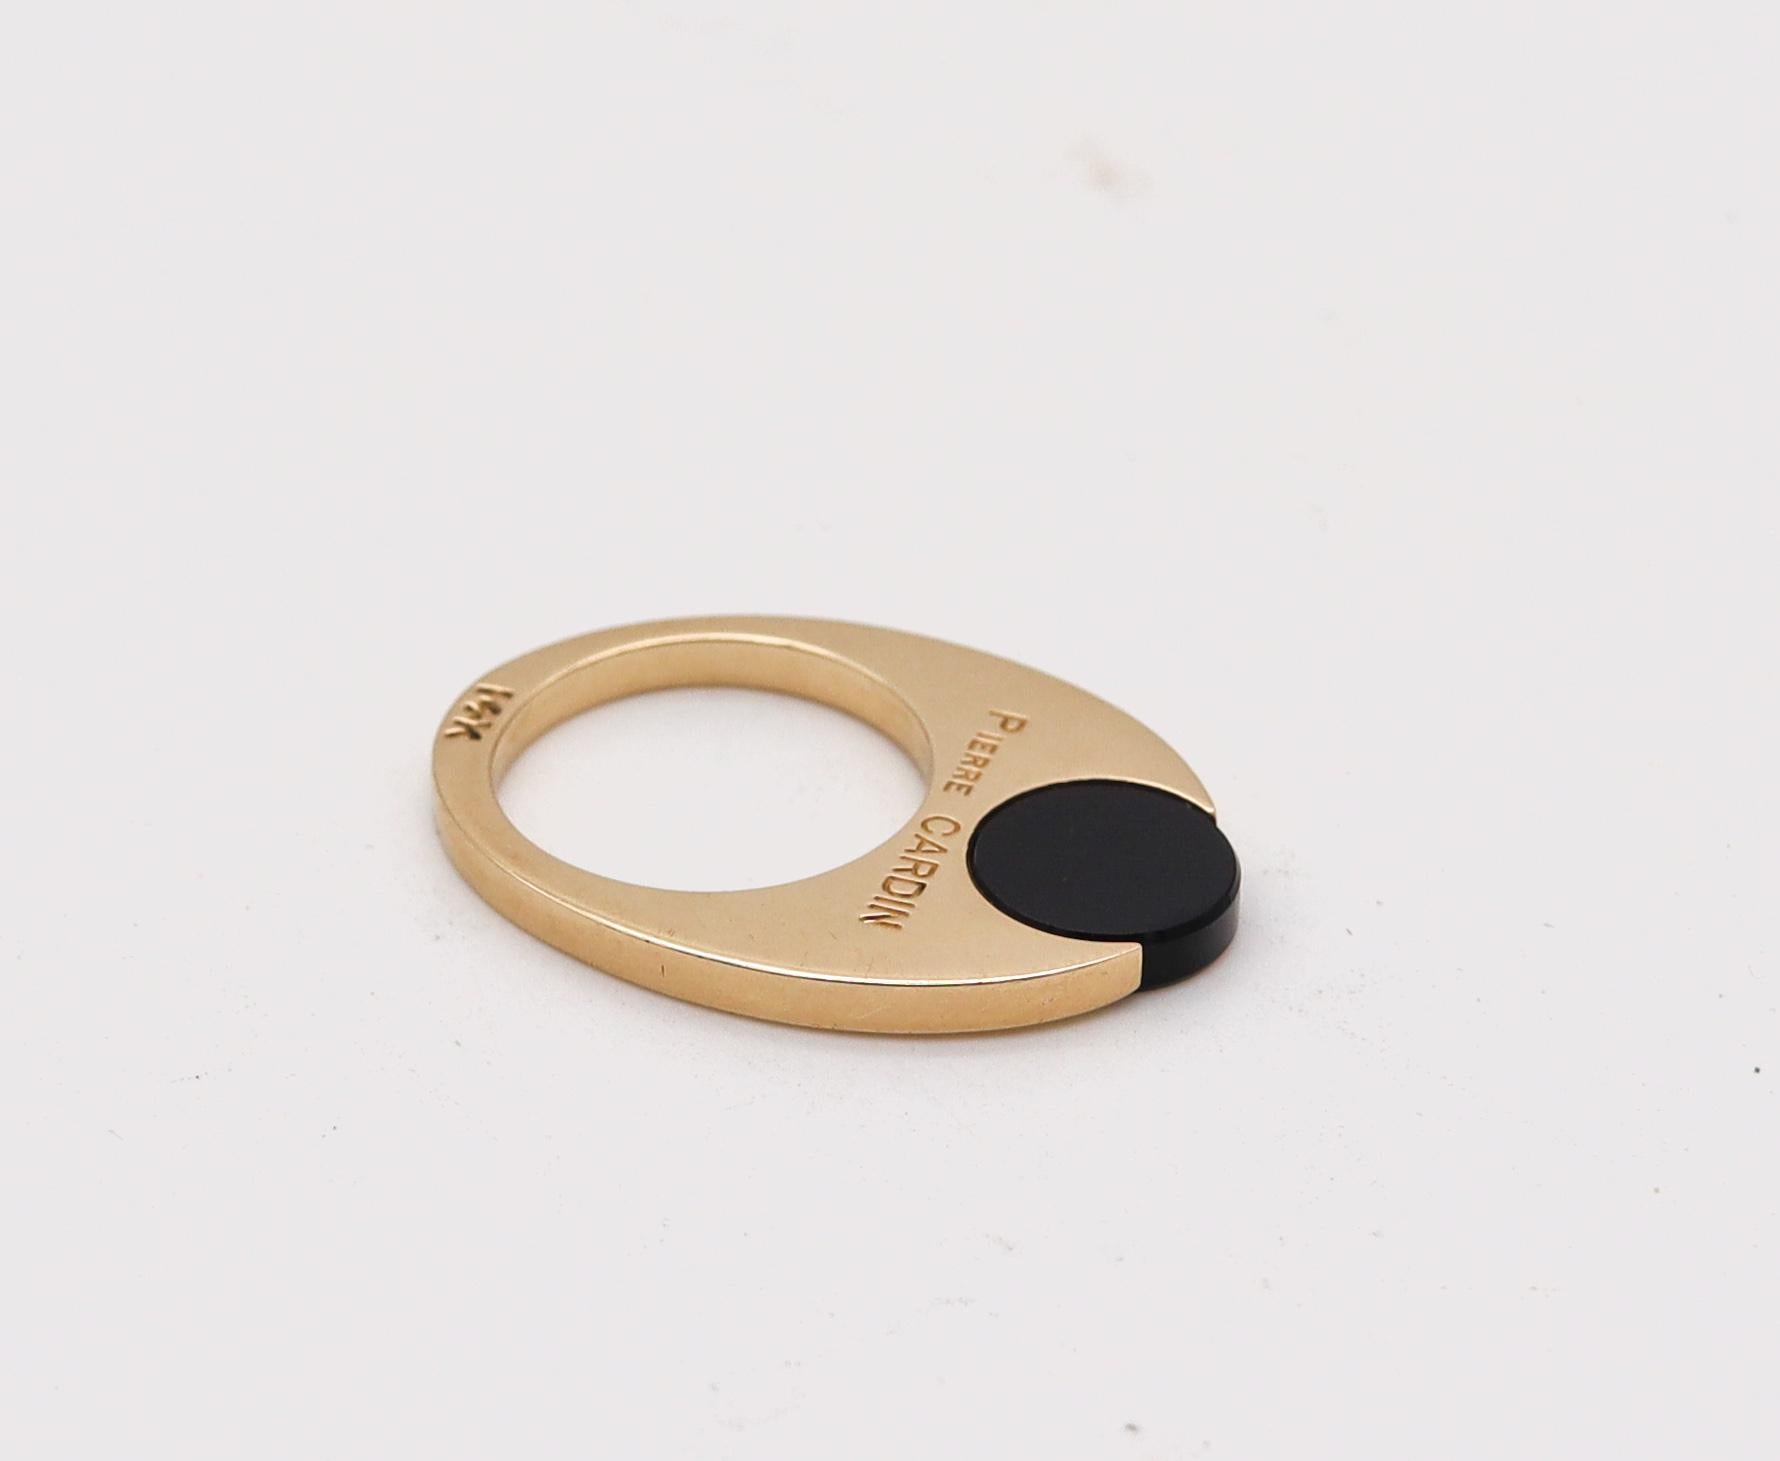 Geometric ring designed by Pierre Cardin.

Gorgeous modernist piece, created in France by the Parisian fashion designer Pierre Cardin, back in the 1970. This geometric sculptural ring has been crafted with minimalist patterns in solid yellow gold of